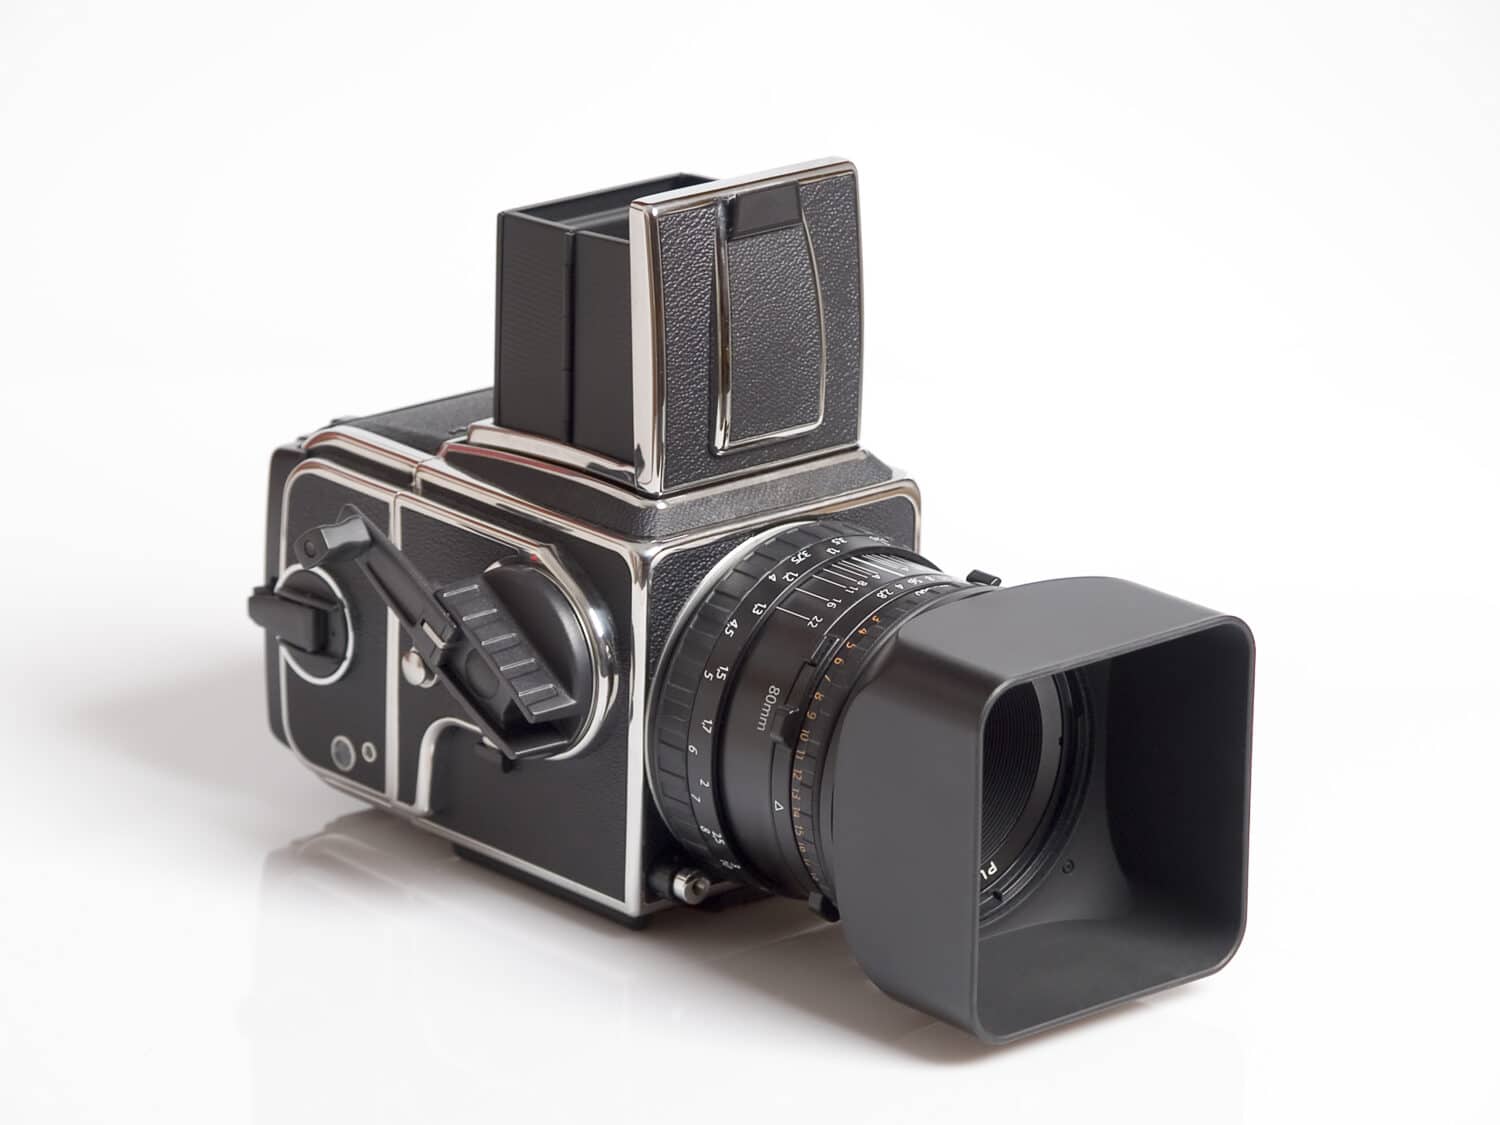 The photo shows a medium format camera over white